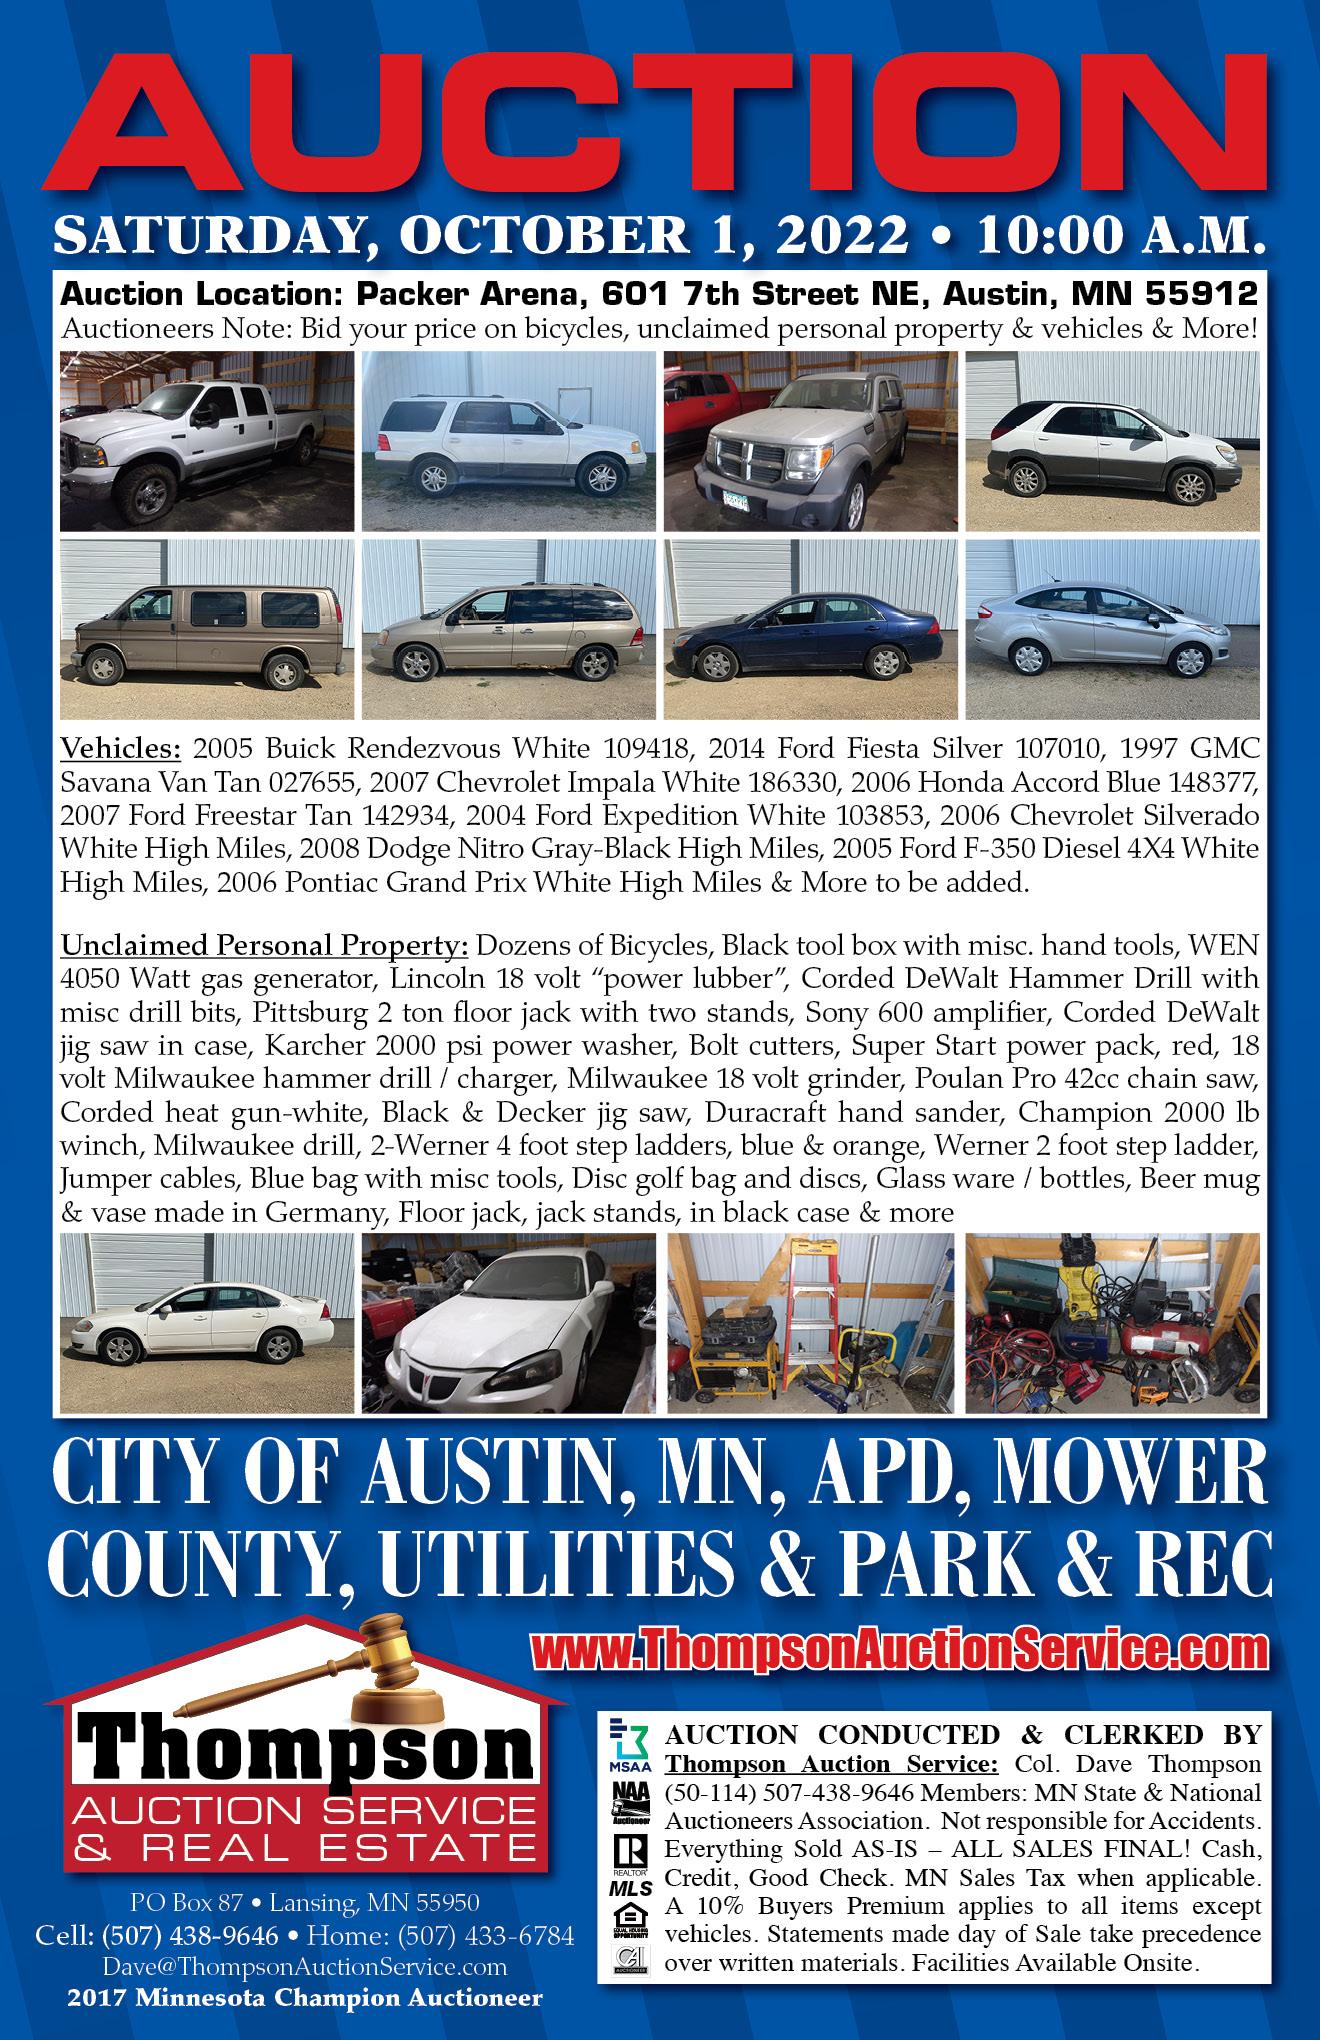 CITY OF AUSTIN, MN - AUSTIN POLICE DEPT. MOWER COUNTY SEMI-ANNUAL LIVE AUCTION